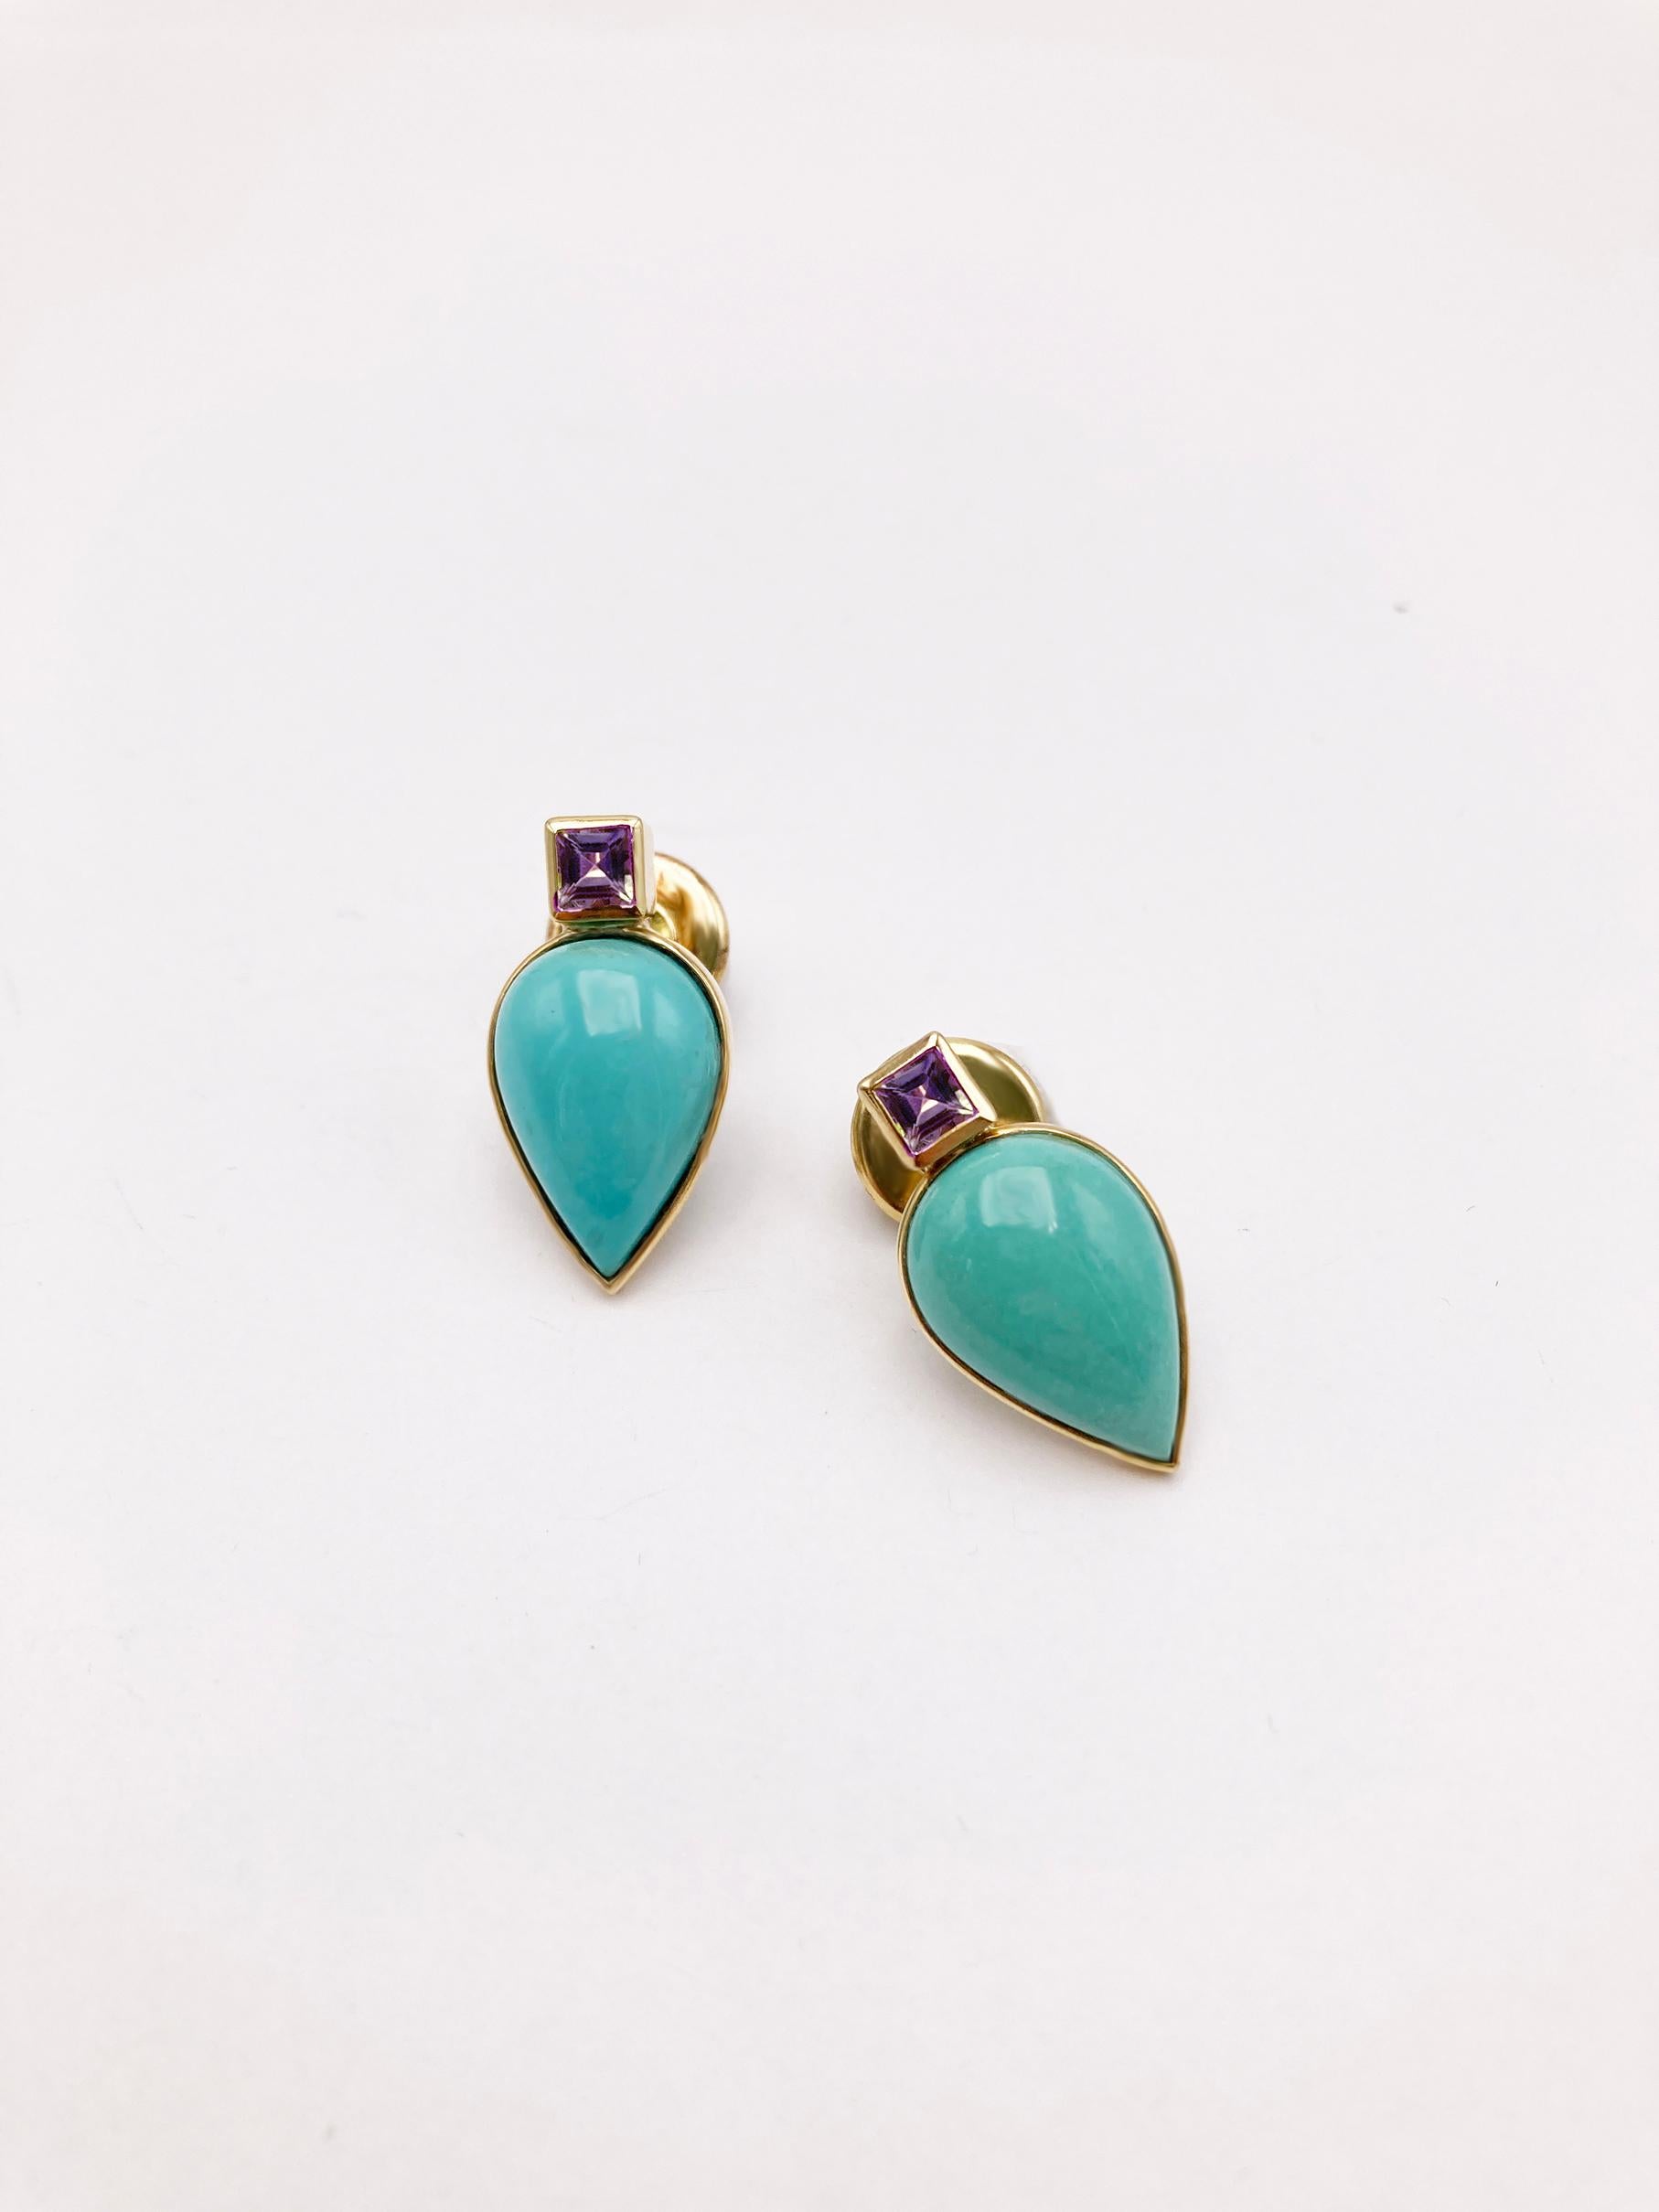 Rossella Ugolini 18K Yellow Gold Amethyst Turquoise Colored Earrings  For Sale 1